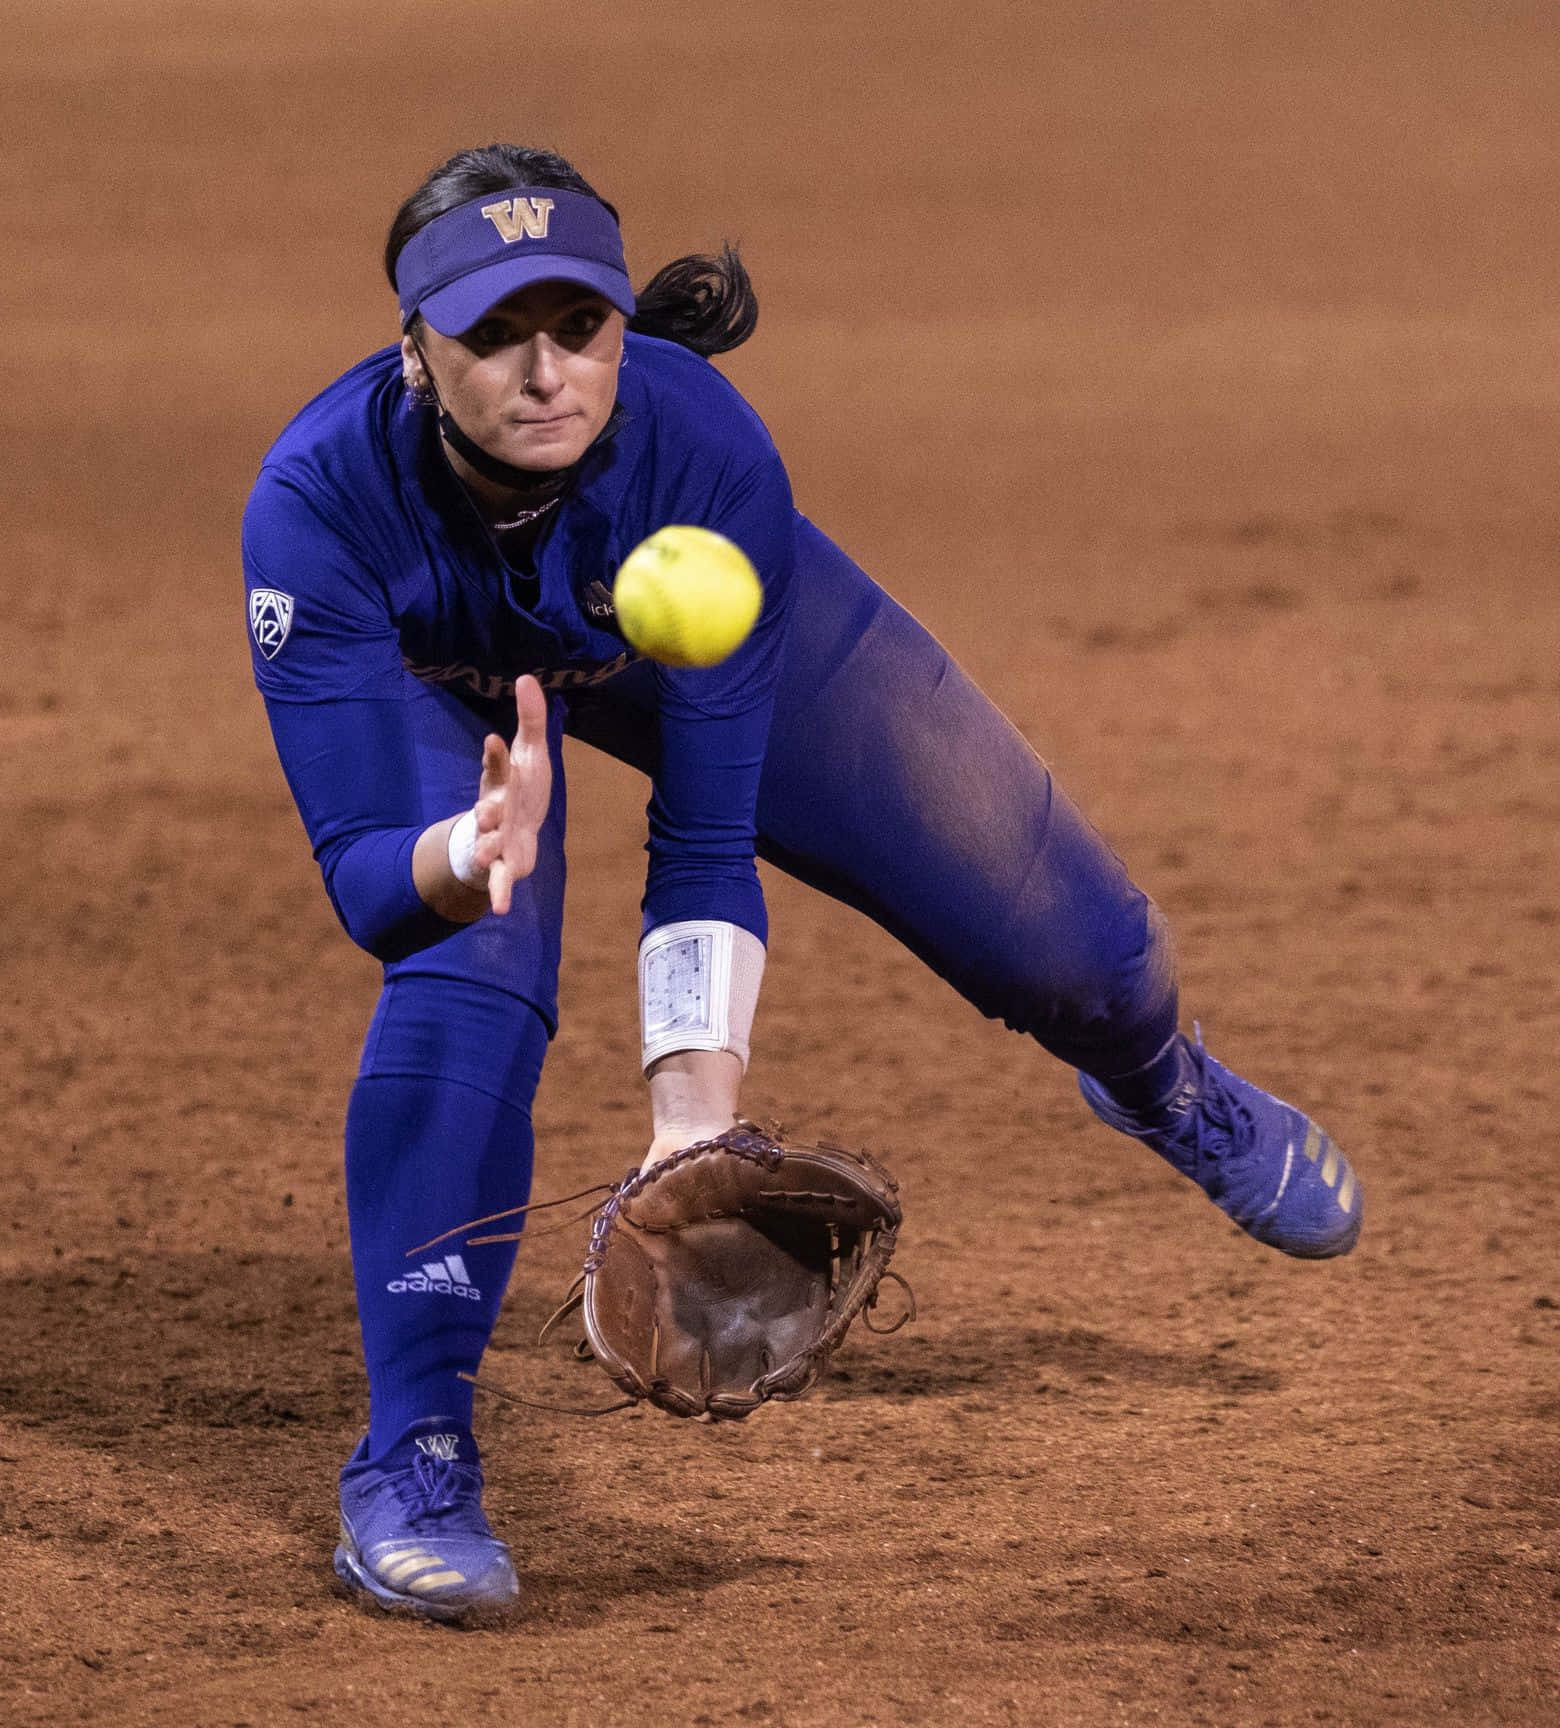 A Female Softball Player Digs Deep to Make the Play